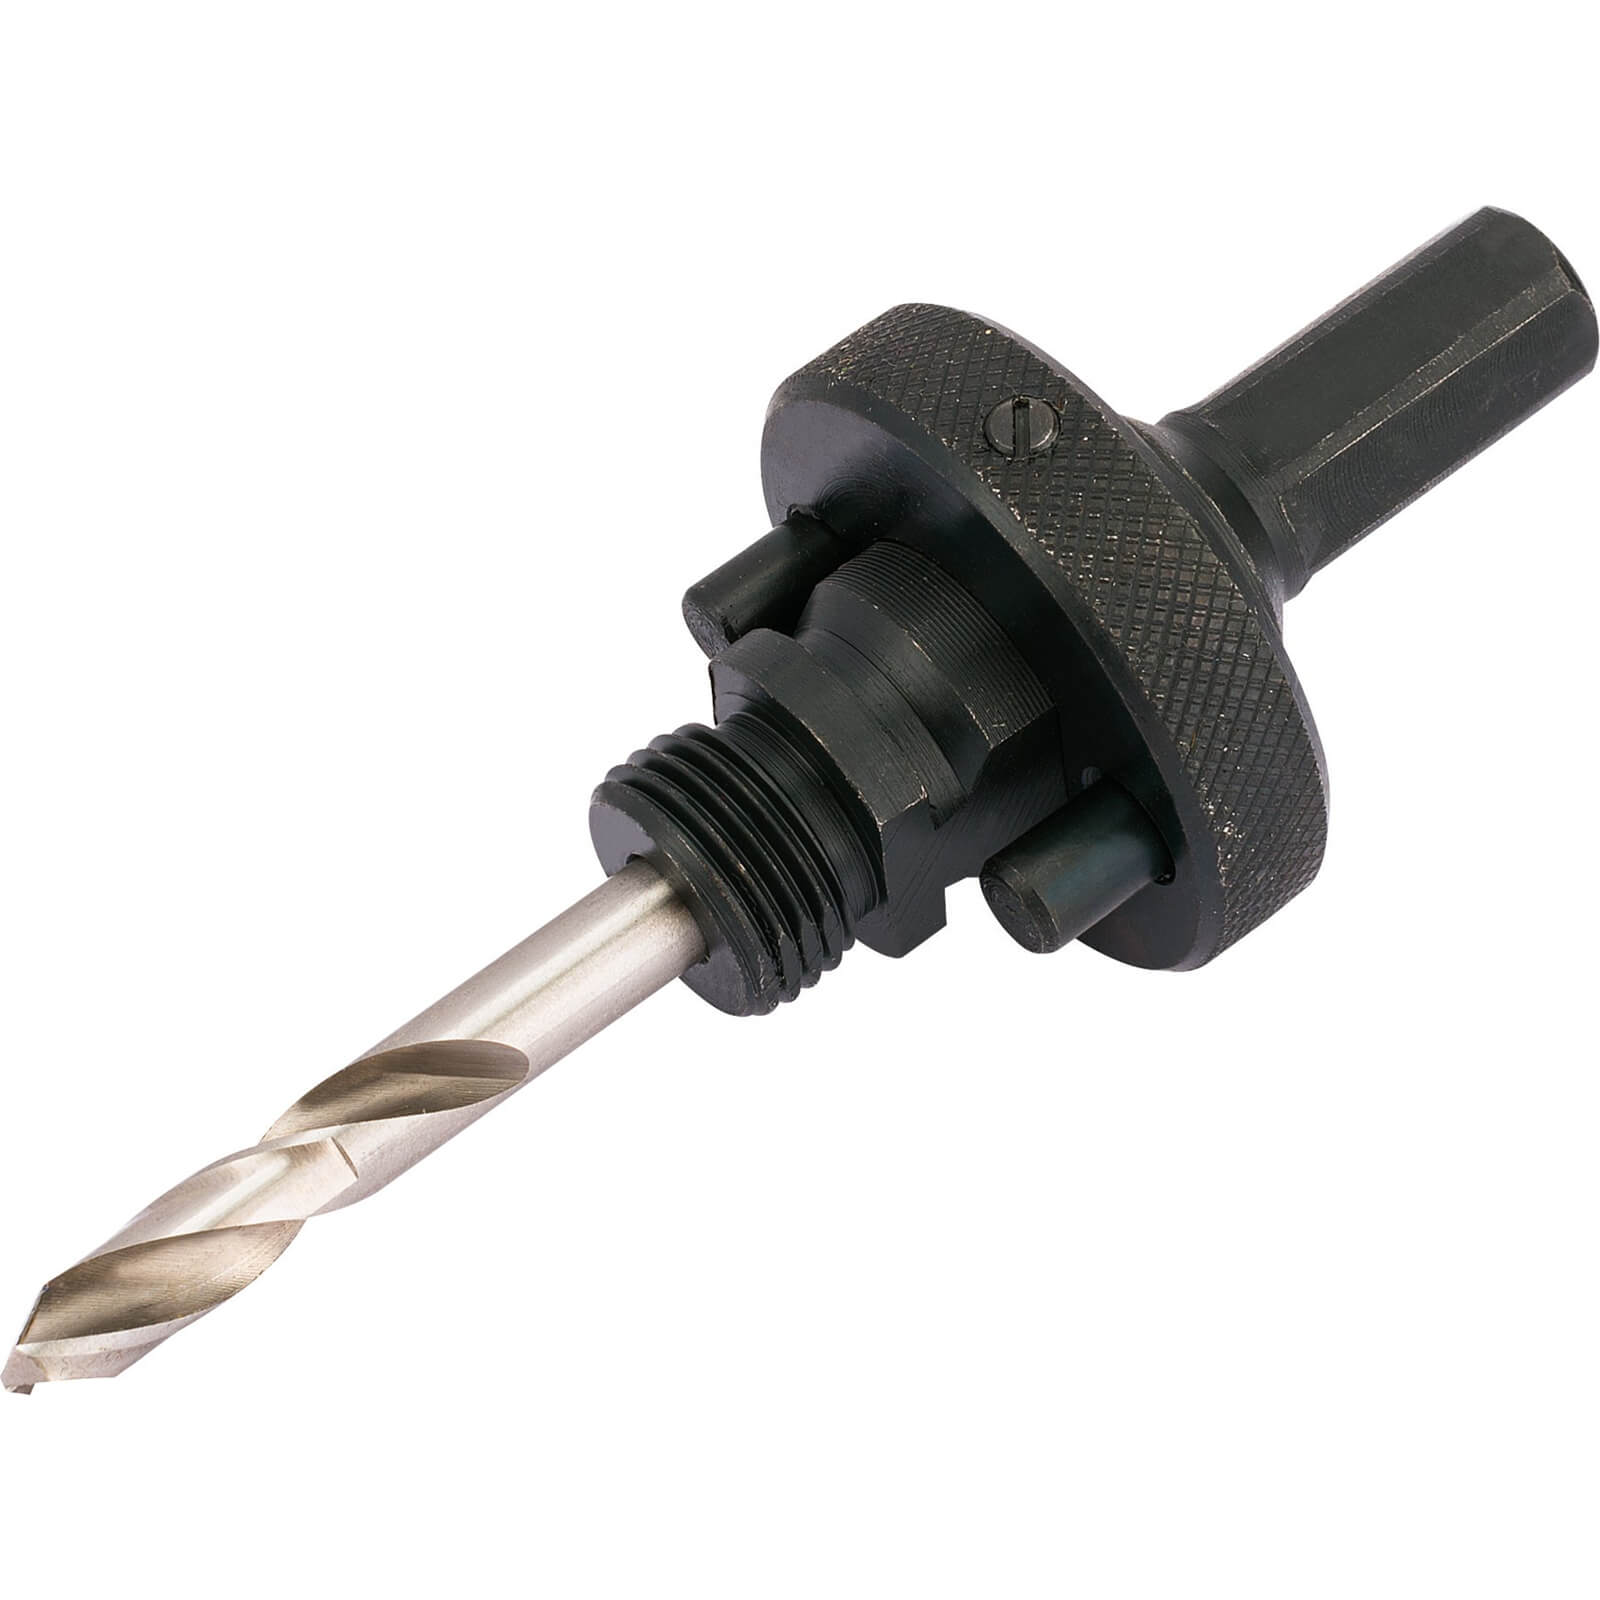 Image of Draper Arbor 11mm Shank To Suit 32mm - 152mm Hole Saws